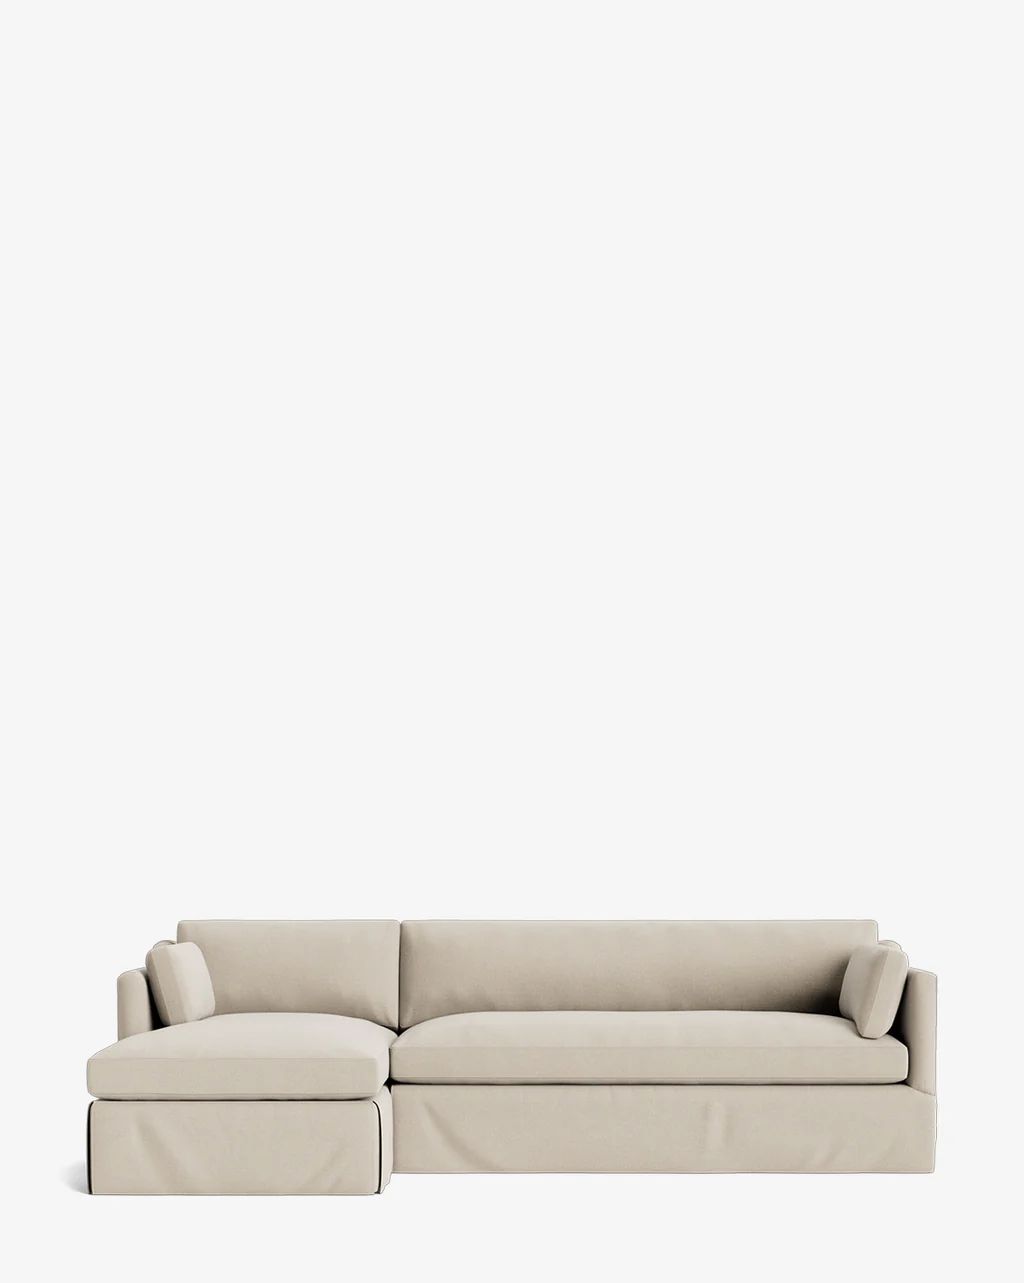 Haverford Slipcover Sectional | McGee & Co.